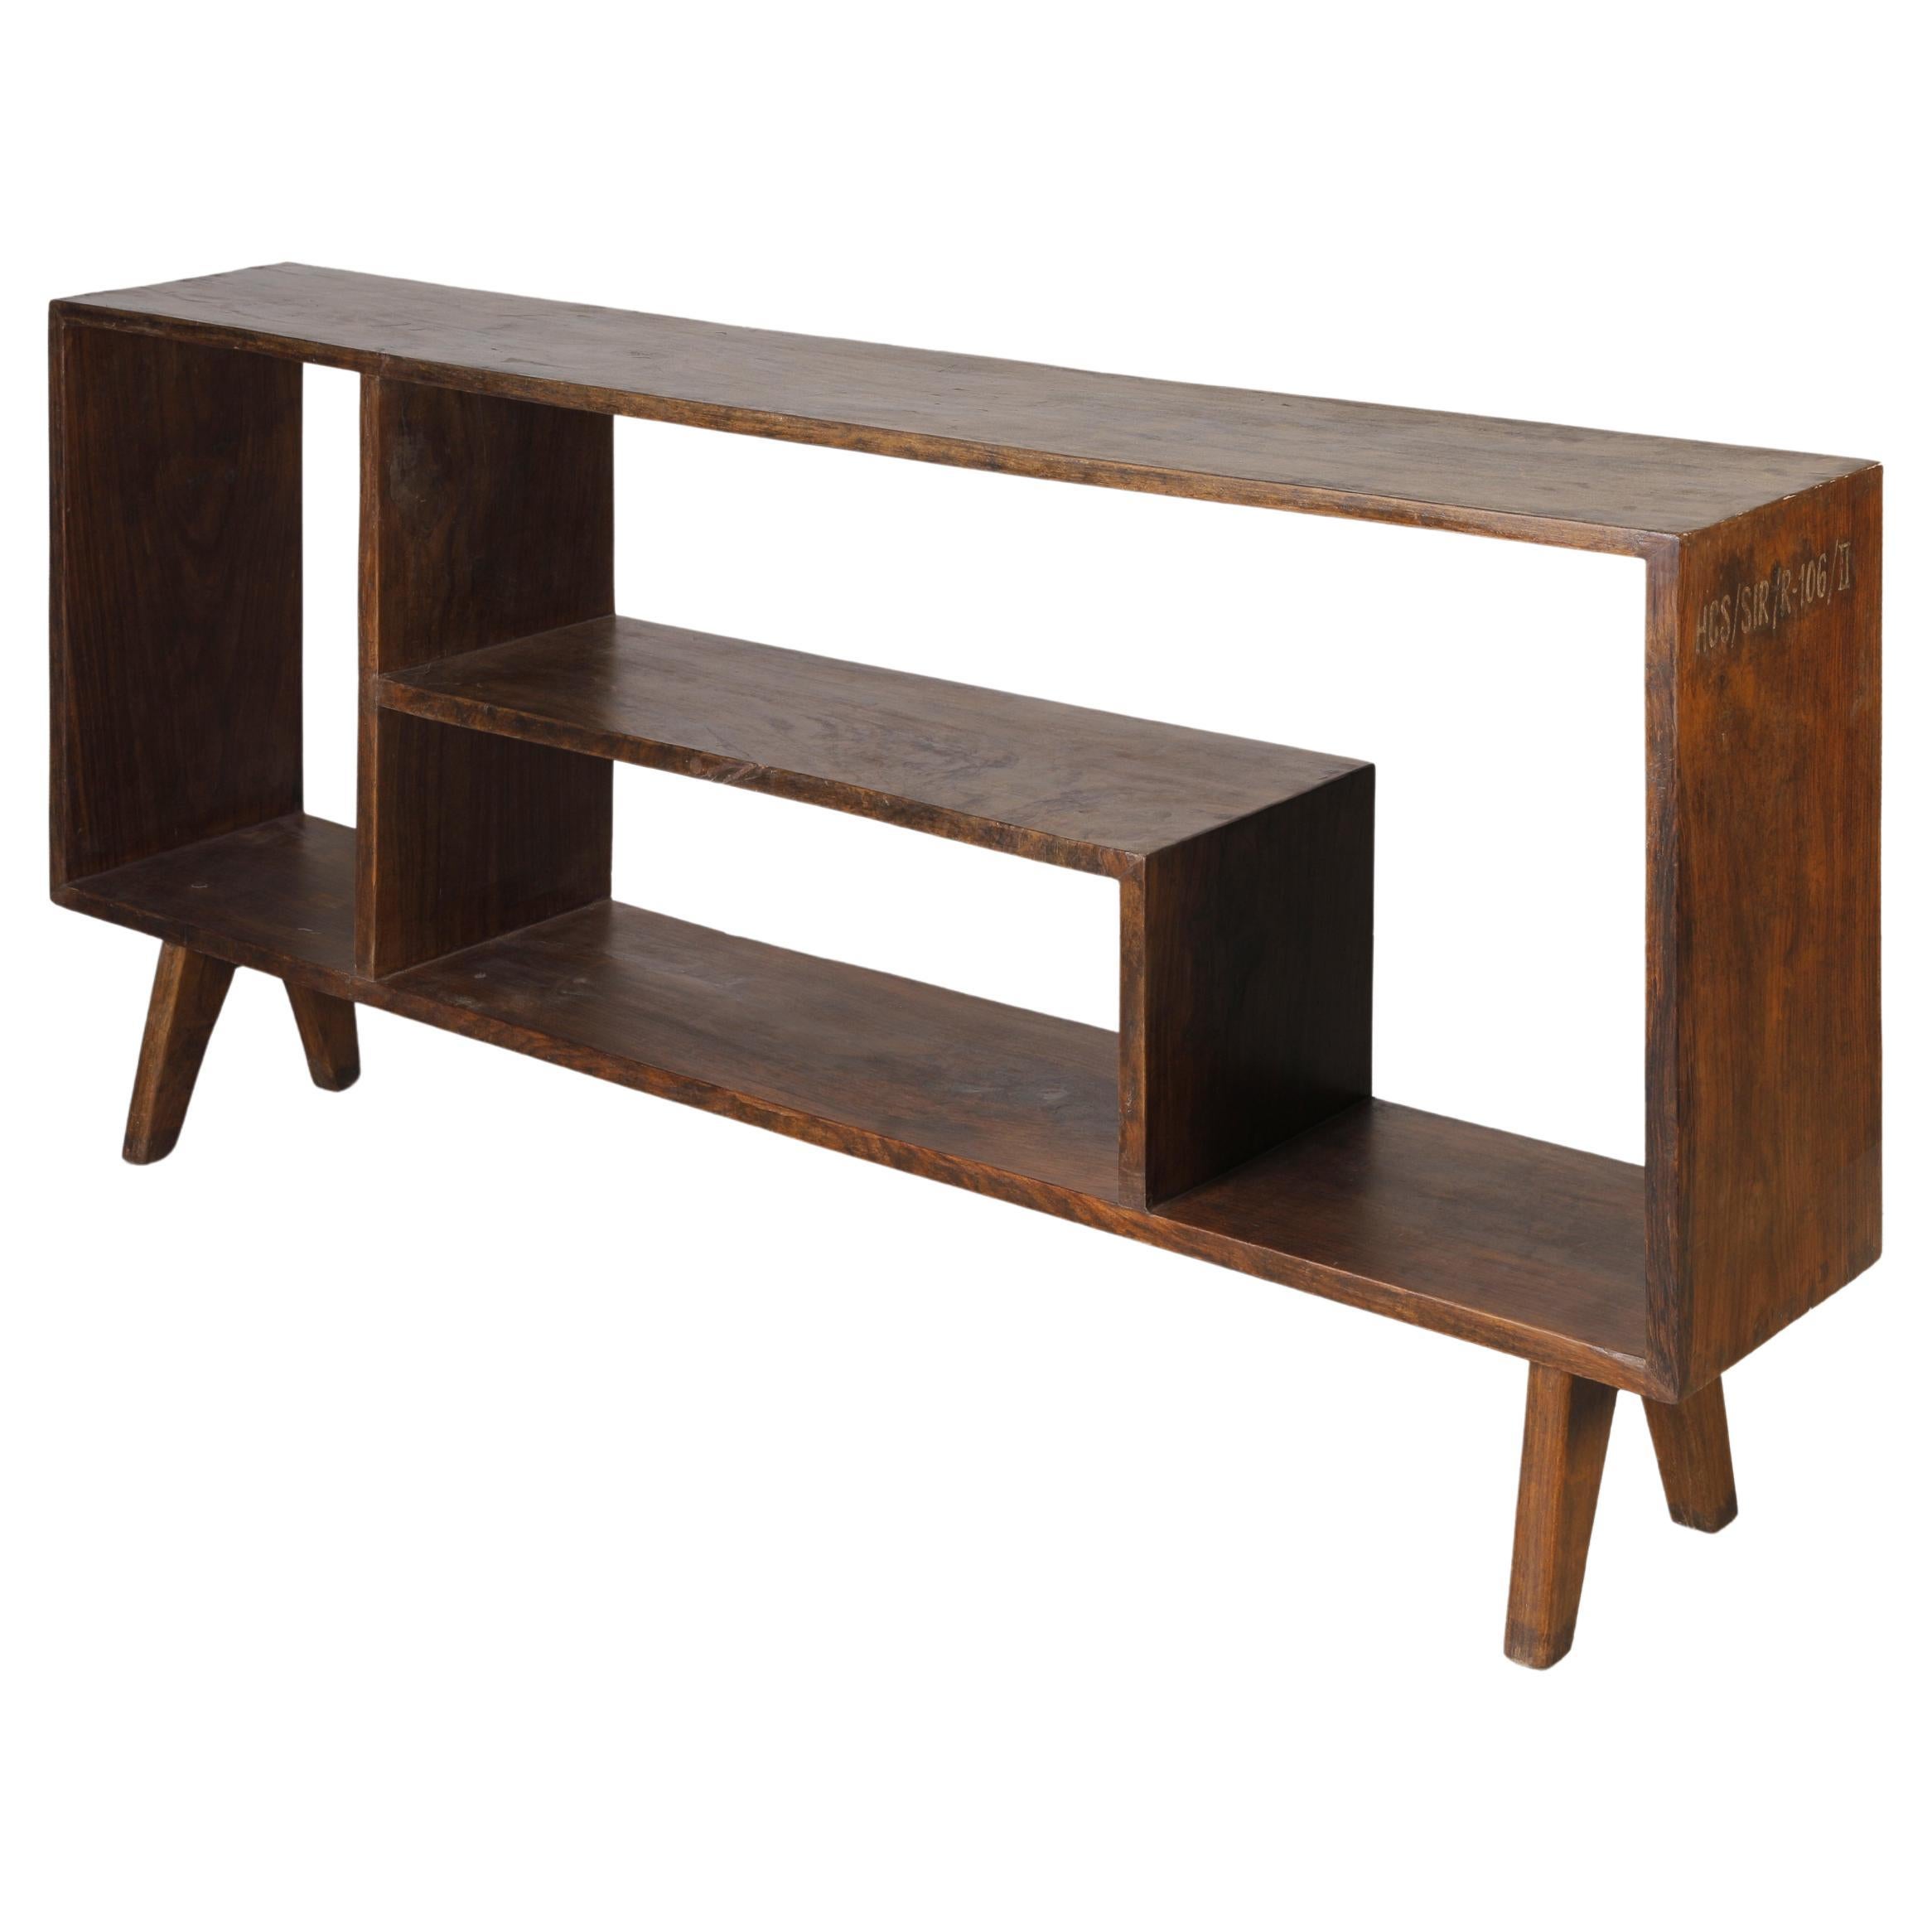 Pierre Jeanneret PJ-R-16-A File Rack / Authentic Mid-Century Modern Chandigarh For Sale